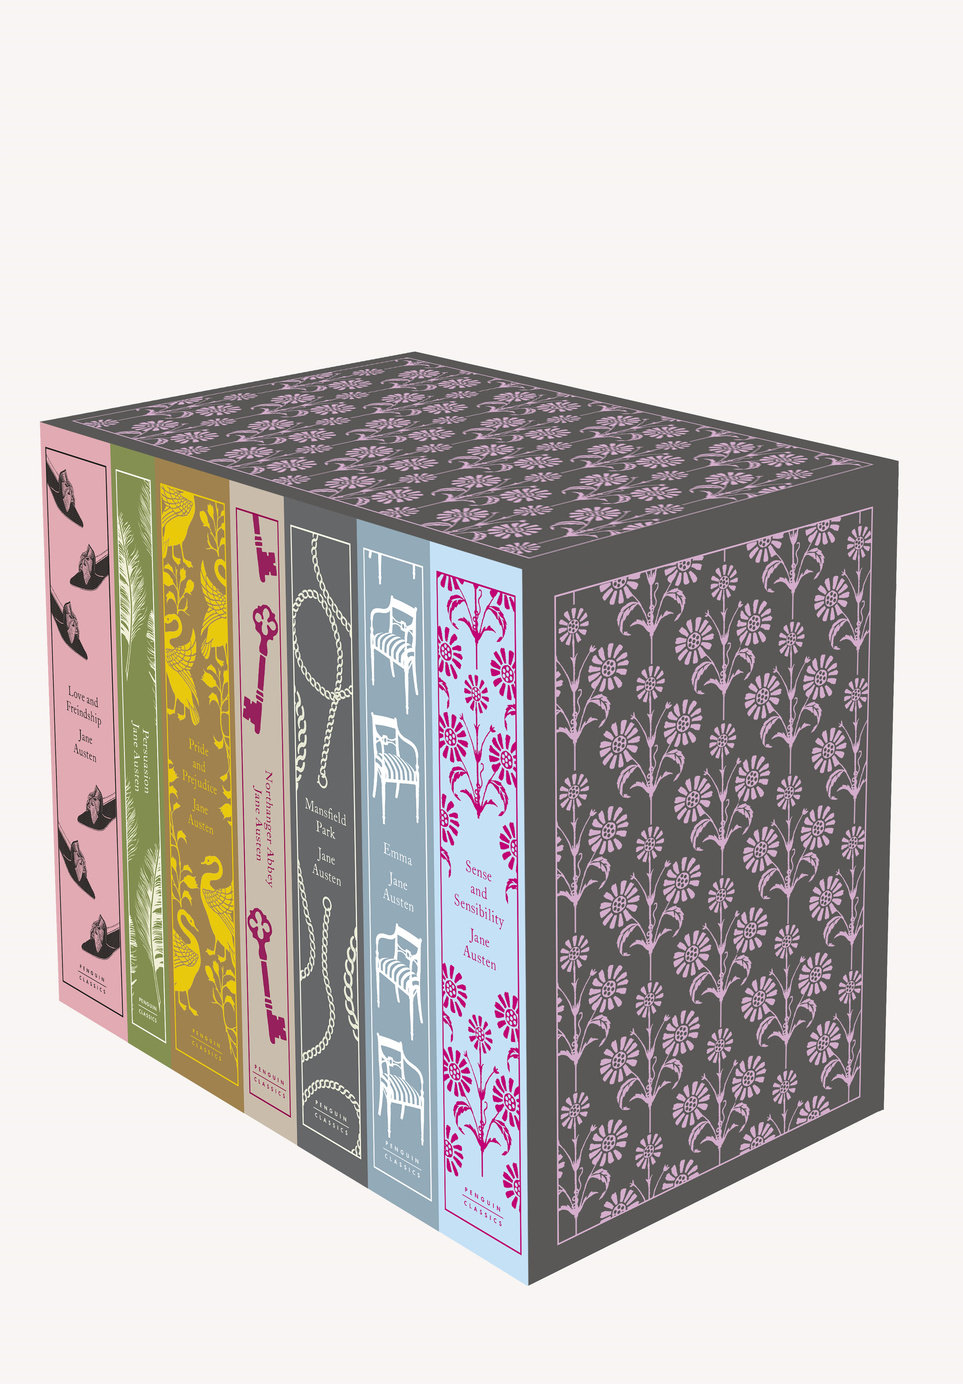 Jane Austen: The Complete Works 7-Book Boxed Set : Sense and Sensibility; Pride and Prejudice; Mansfield Park; Emma; Northanger Abbey; Persuasion; Love and Freindship (Penguin Classics hardcover boxed | Austen, Jane